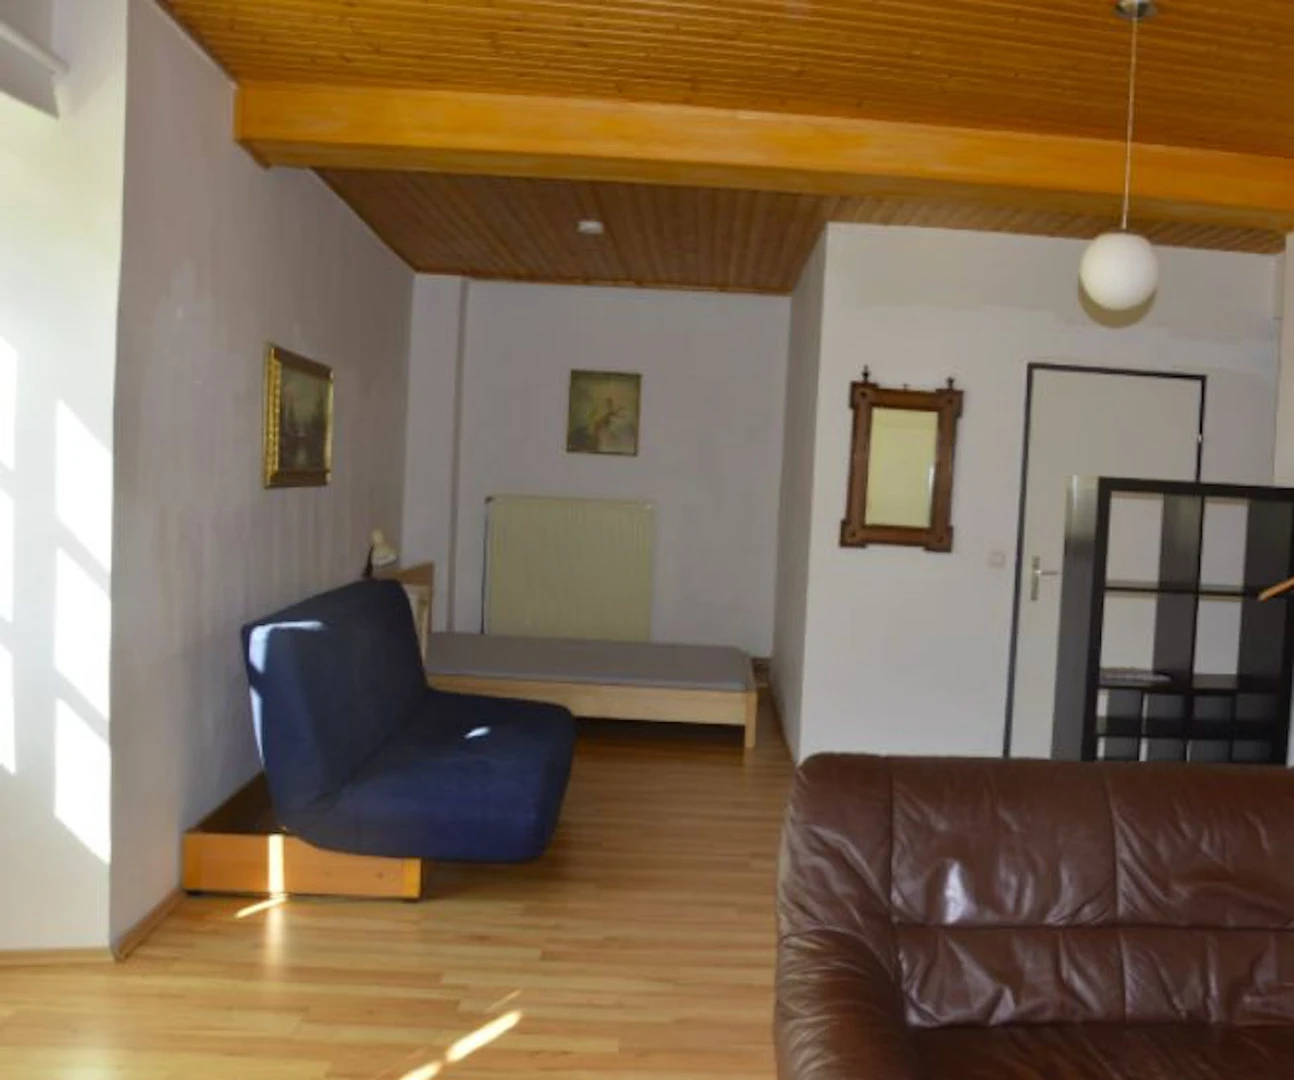 Accommodation in the centre of Graz